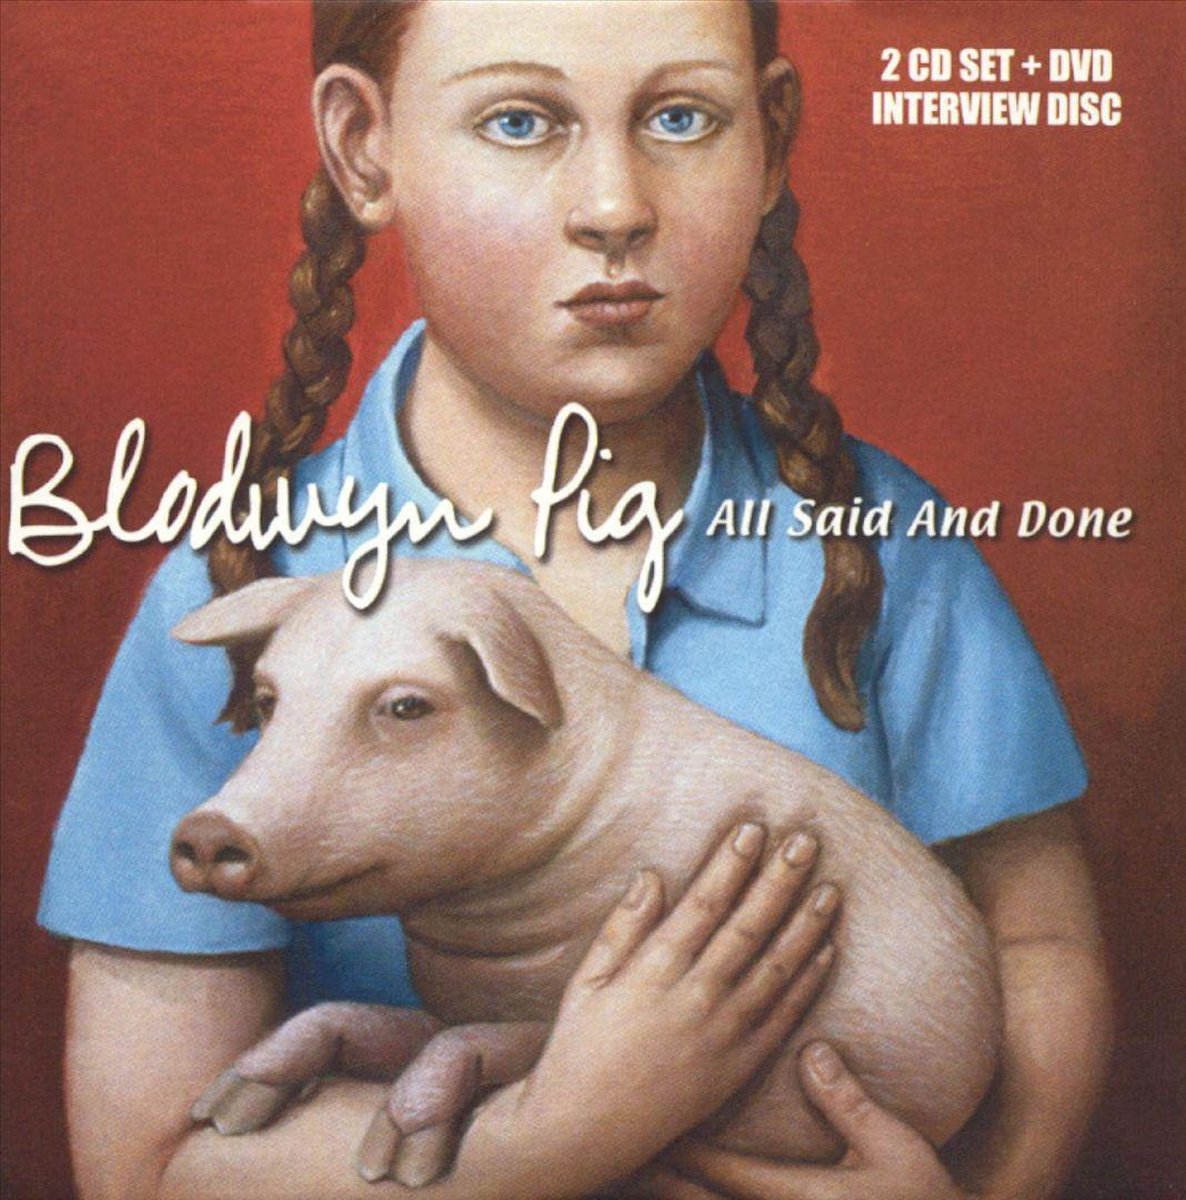 All Said and Done - Blodwyn Pig